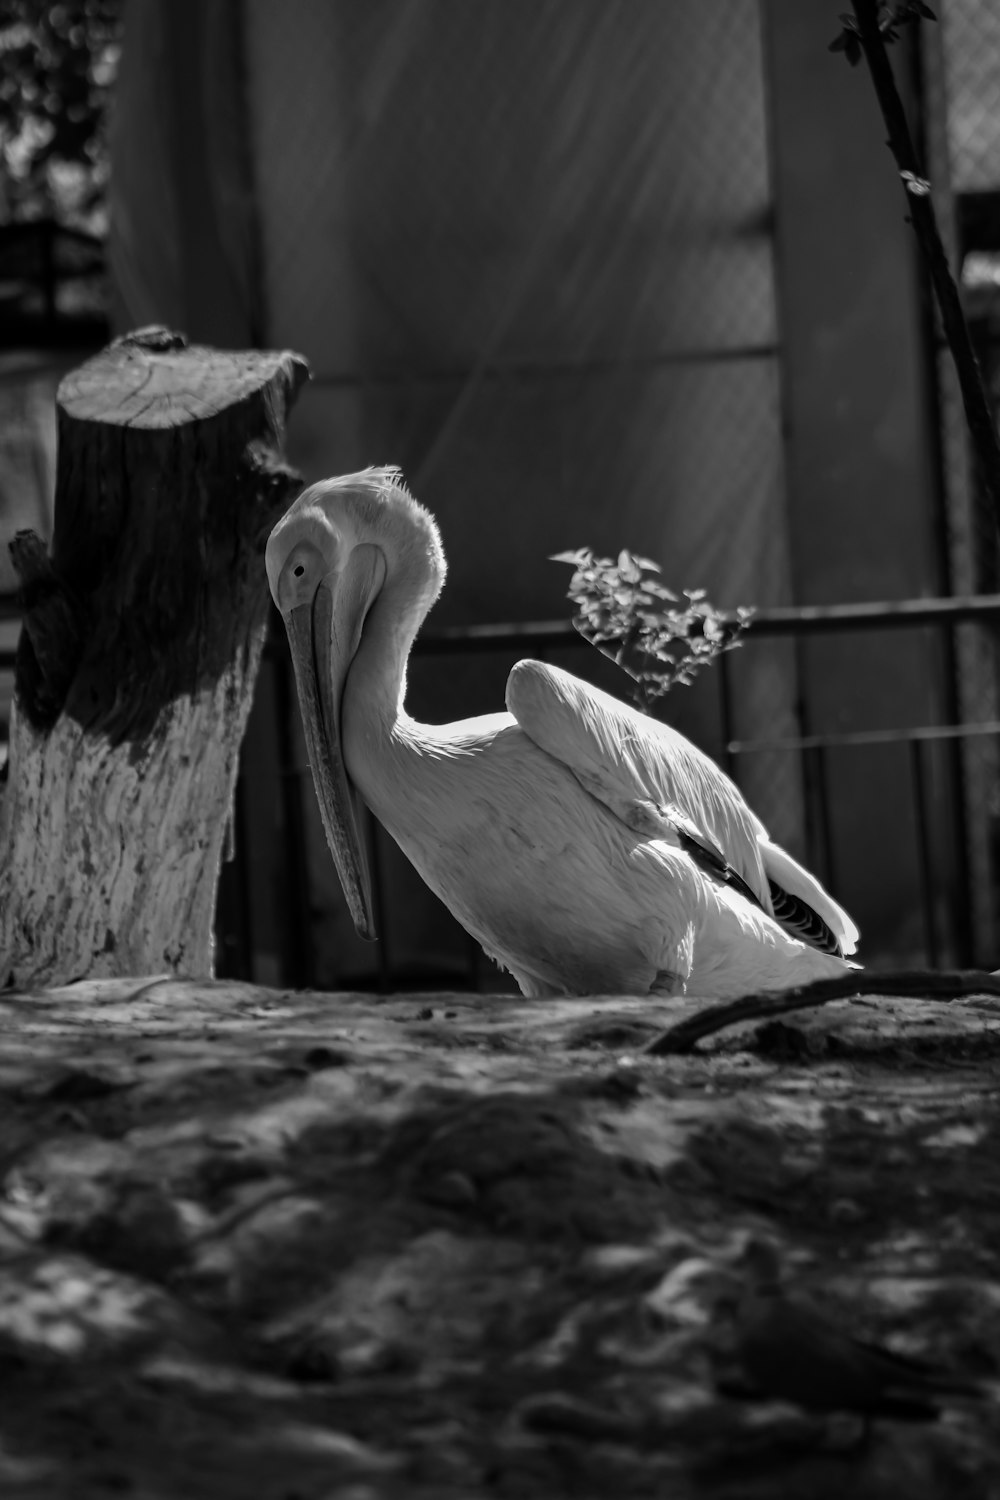 a pelican sitting on the ground next to a tree stump